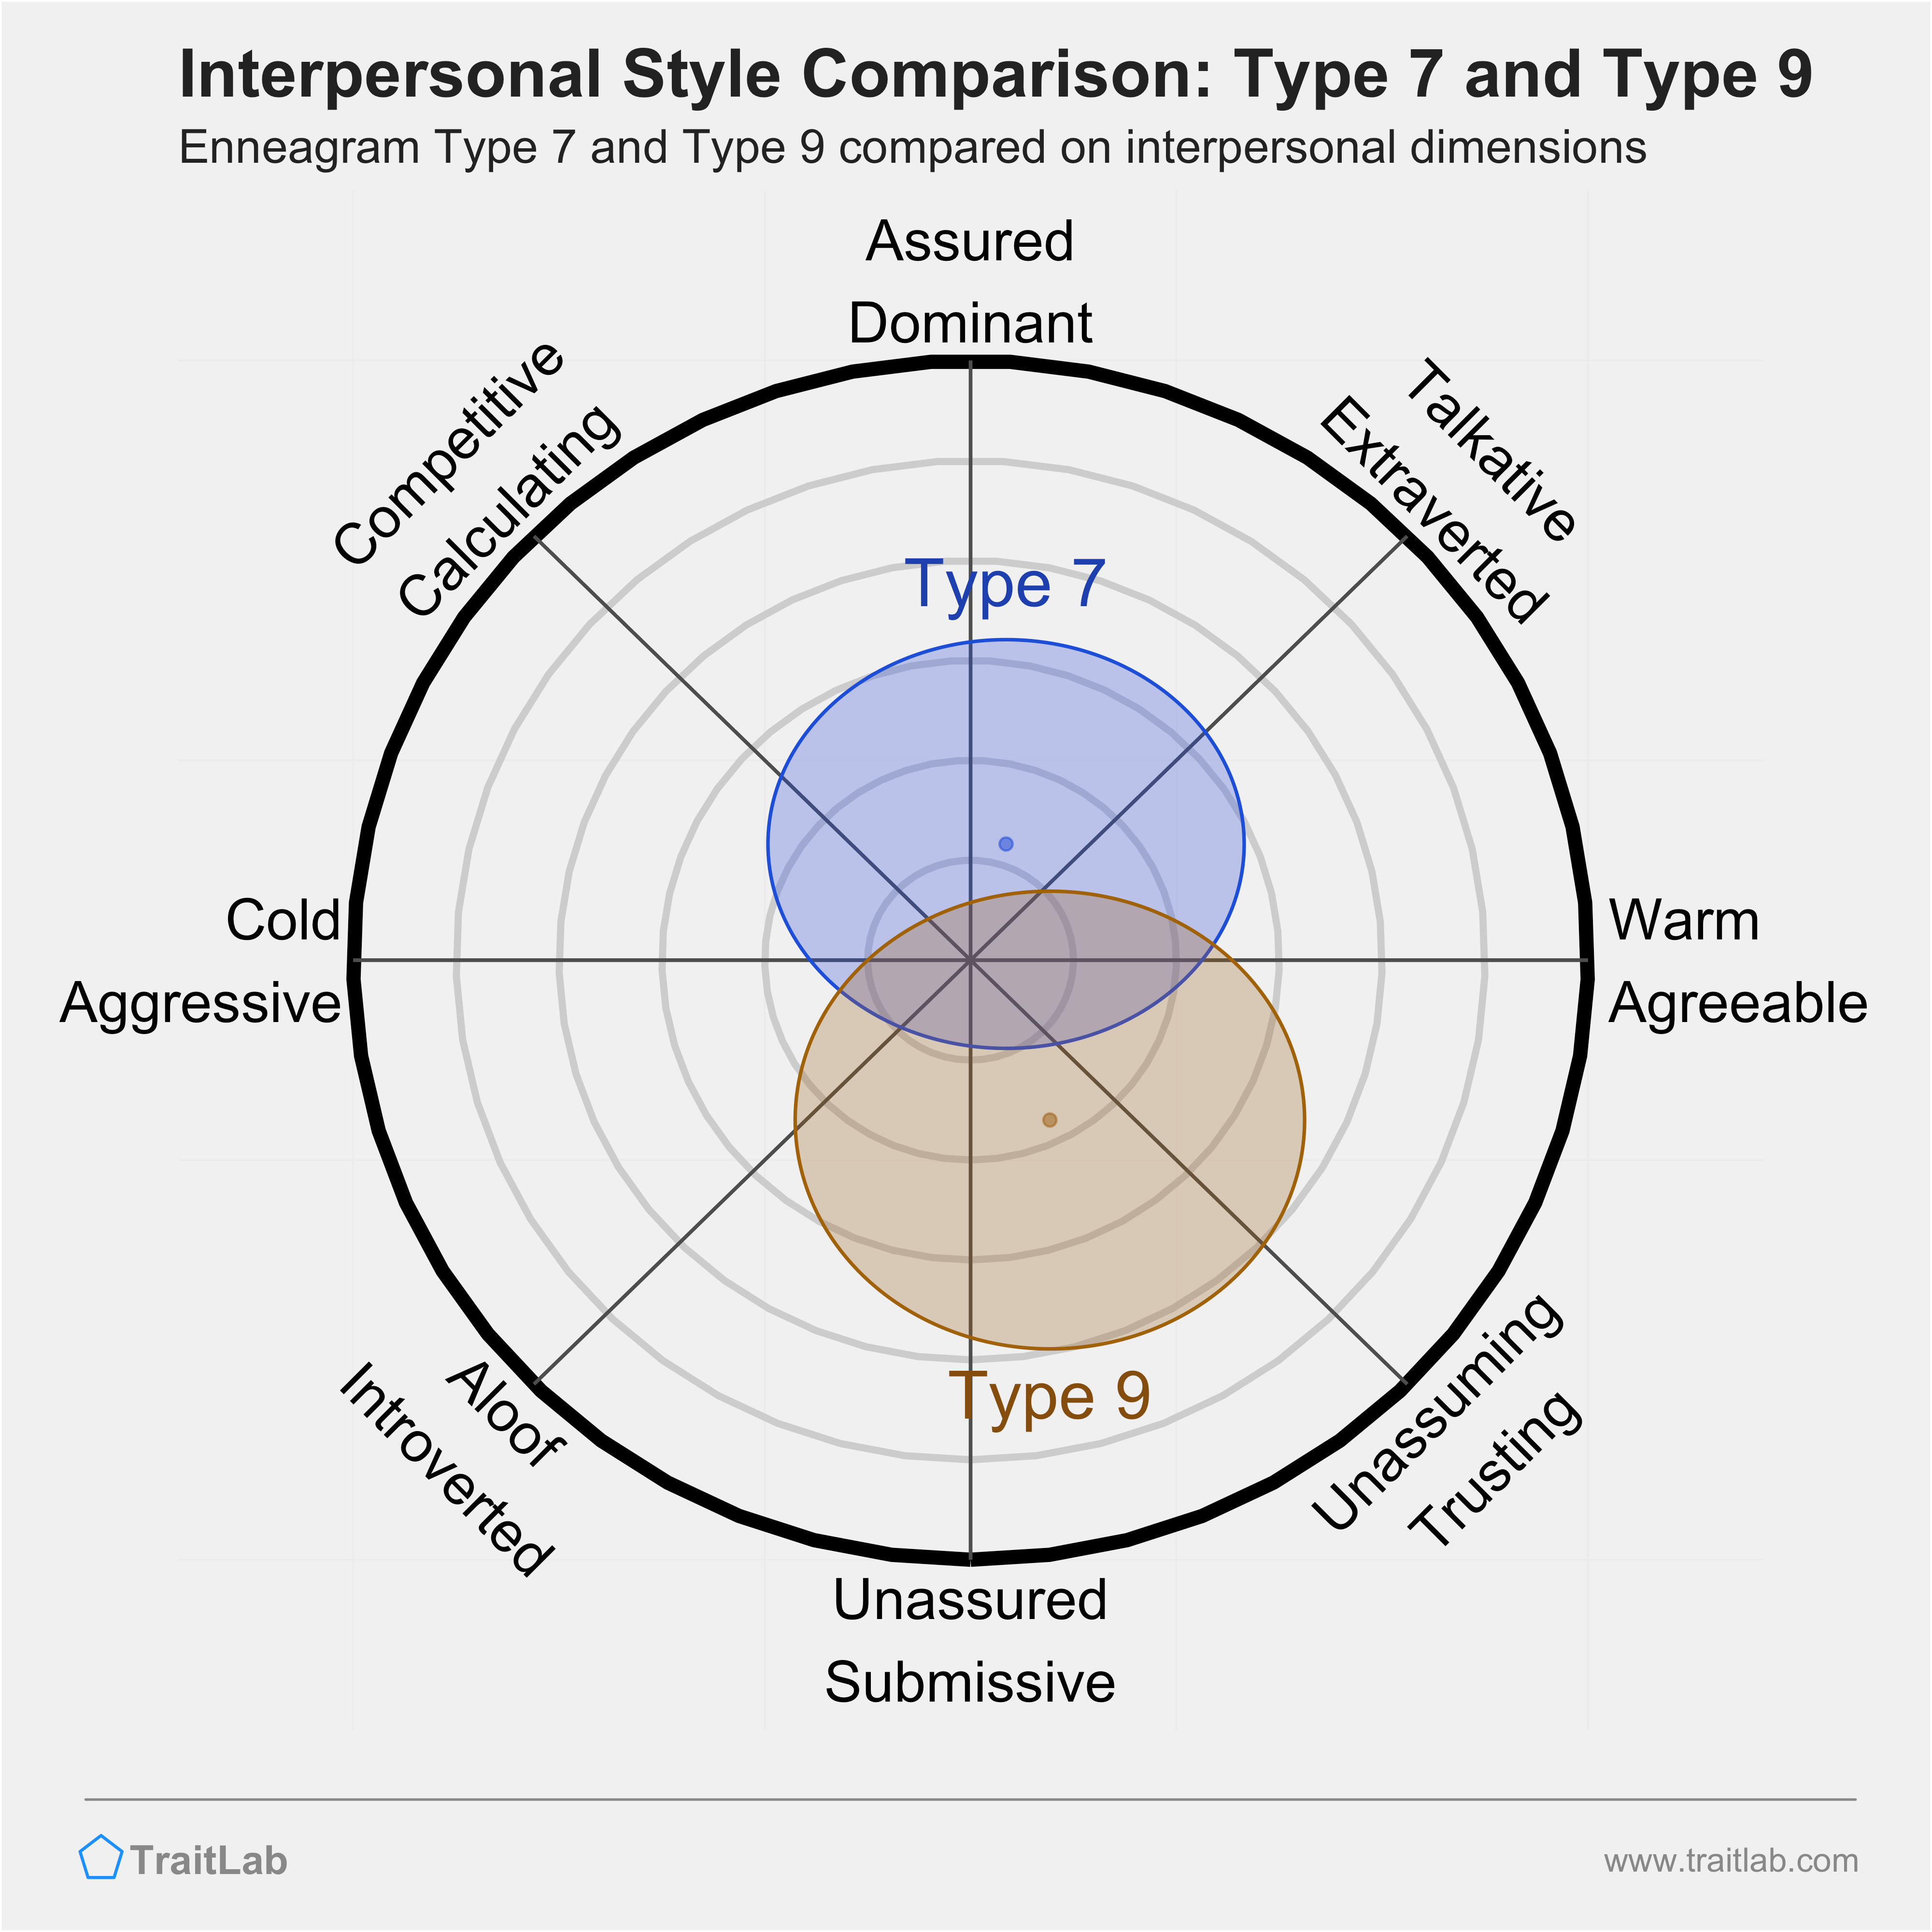 Enneagram Type 7 and Type 9 comparison across interpersonal dimensions